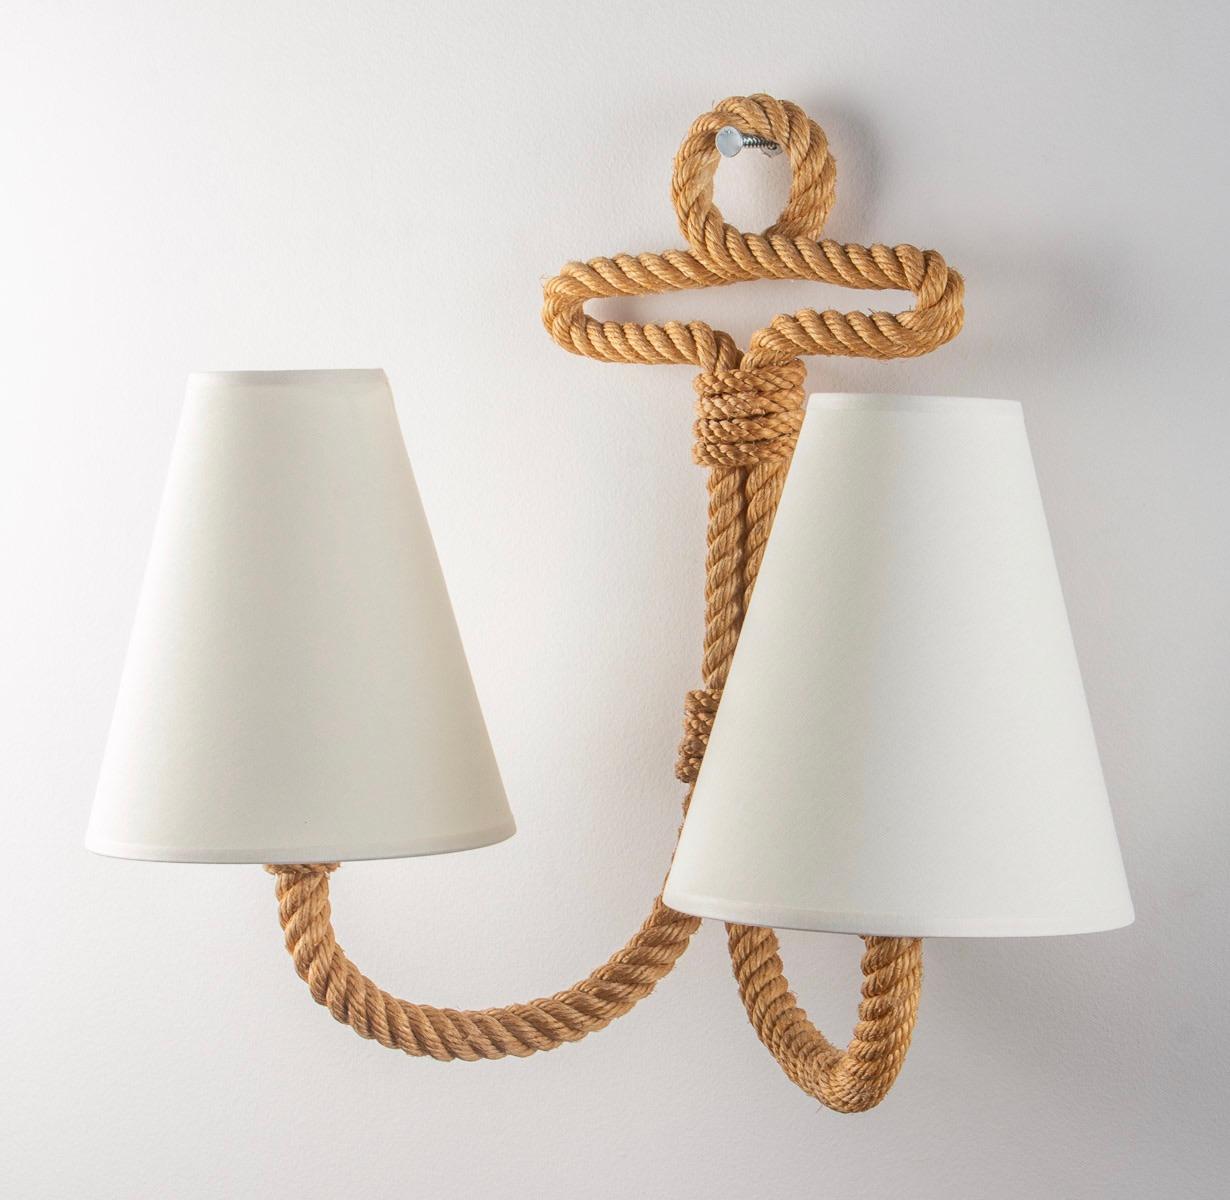 1950 Pair of Sconces in Rope by Adrien & Frida Minet 1